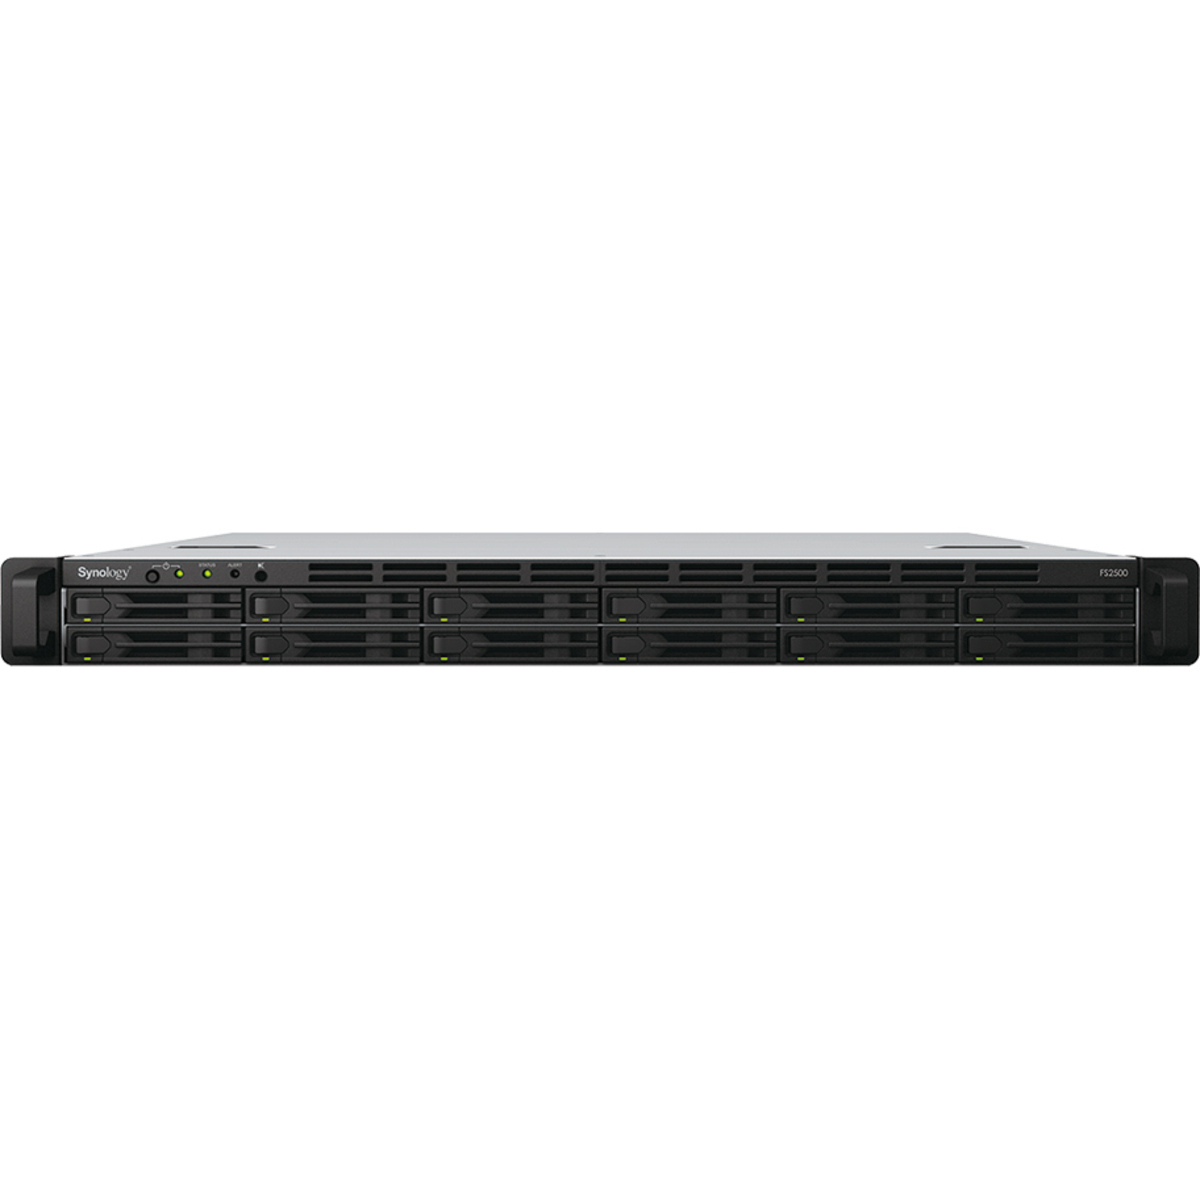 Synology FlashStation FS2500 20tb 12-Bay RackMount Large Business / Enterprise NAS - Network Attached Storage Device 10x2tb Crucial MX500 CT2000MX500SSD1 2.5 560/510MB/s SATA 6Gb/s SSD CONSUMER Class Drives Installed - Burn-In Tested - FREE RAM UPGRADE FlashStation FS2500